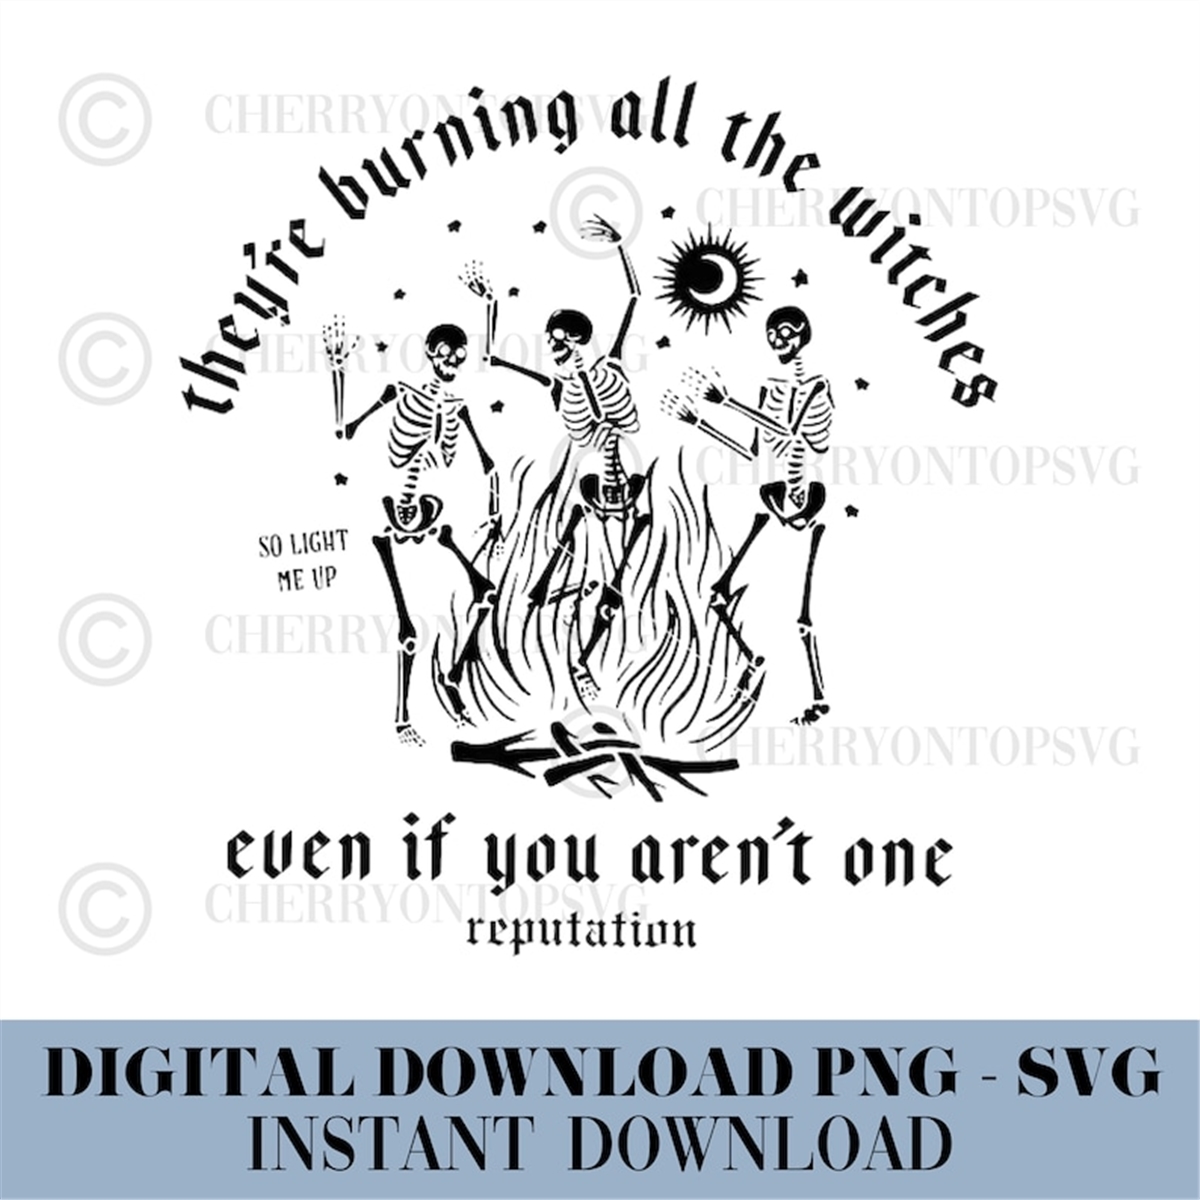 theyre-burning-all-the-witches-svg-snake-reputation-svg-image-1